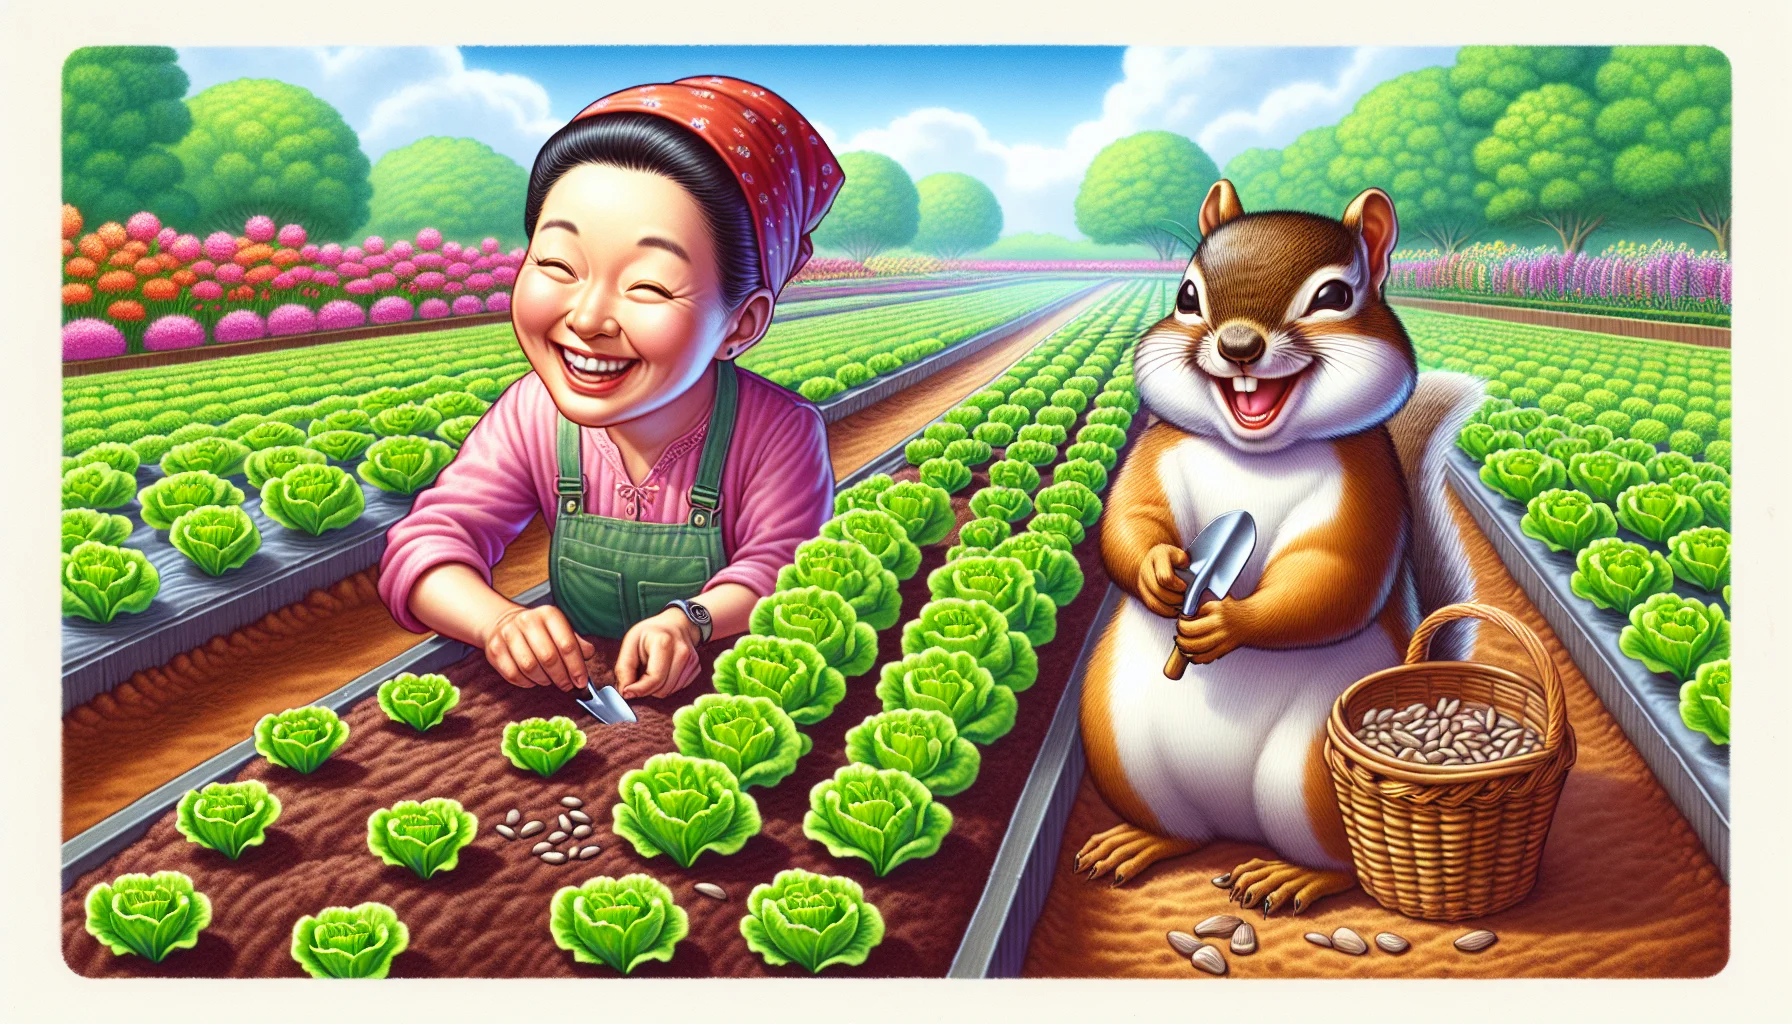 Create a detailed, realistic scene illustrating the process of planting lettuce seeds, but with a humorous twist. In the center, showcase an Asian female gardener happily sowing the seeds onto soft, fertile ground. Beside her, a squirrel beaming with cheeky delight is imitating her actions, mimicking the use of a tiny spade and carrying a miniature basket full of seeds. Keep the background vibrant, lined with beds of flowering plants, and the sky a clear blue. Convey a light-hearted, enjoyable tone throughout the image, inspiring viewers to participate in gardening activities.